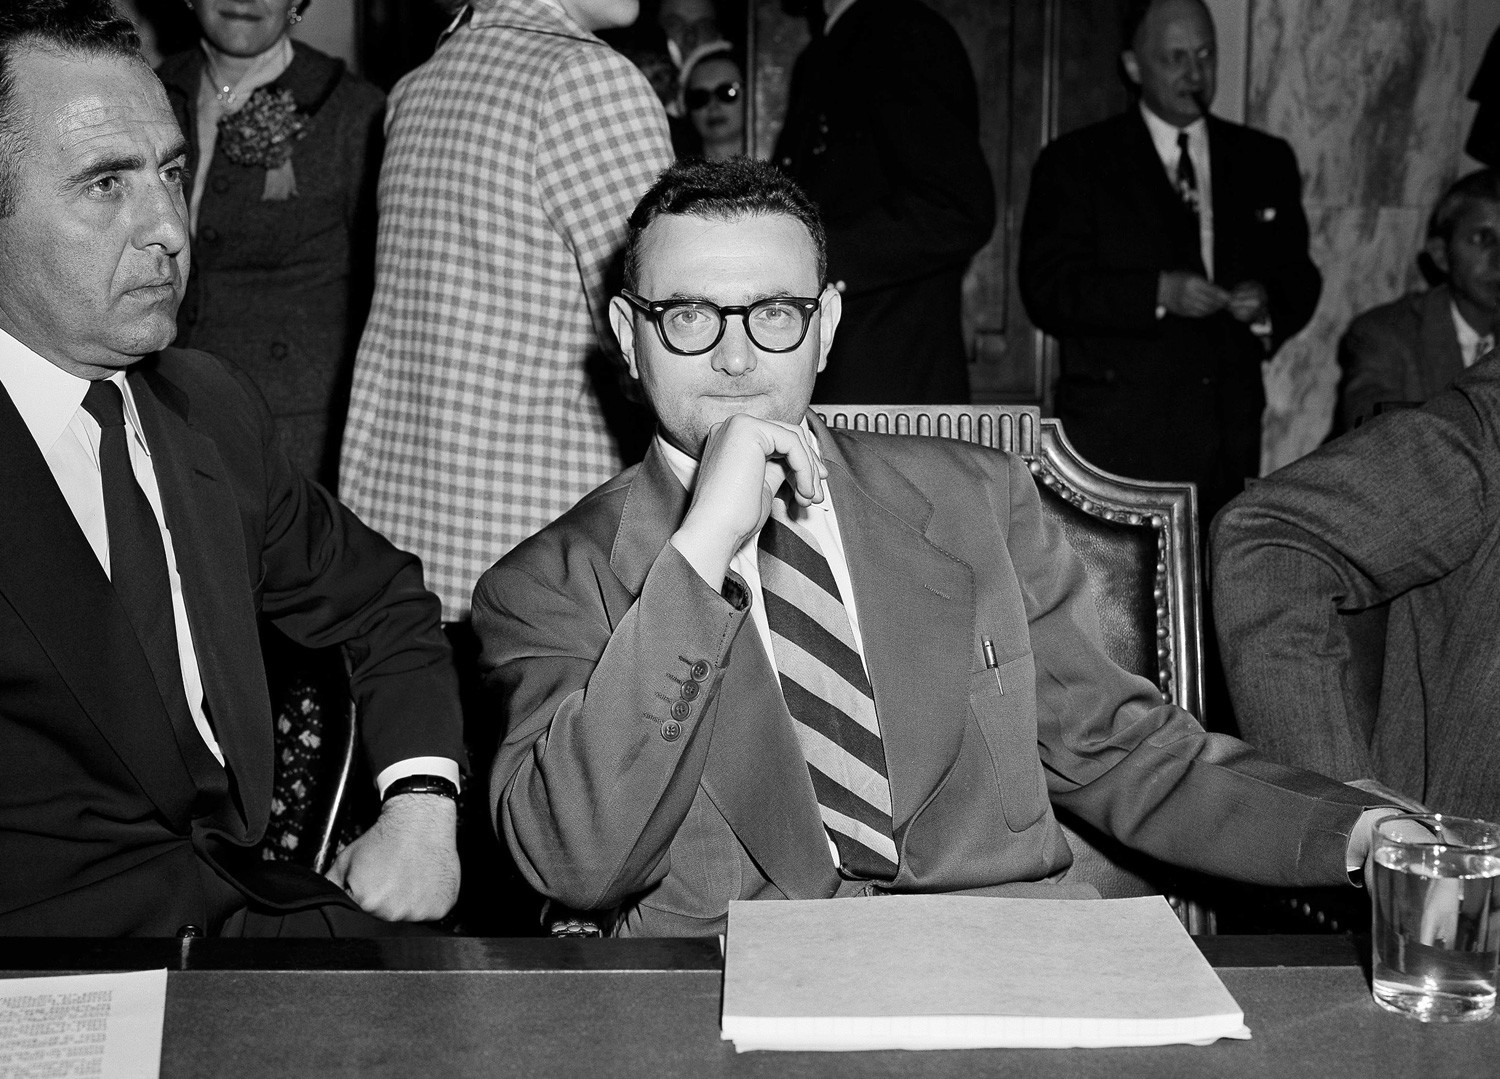 David Greenglass, convicted atomic spy, who testified against his sister Ethel Rosenberg and her husband Julius.